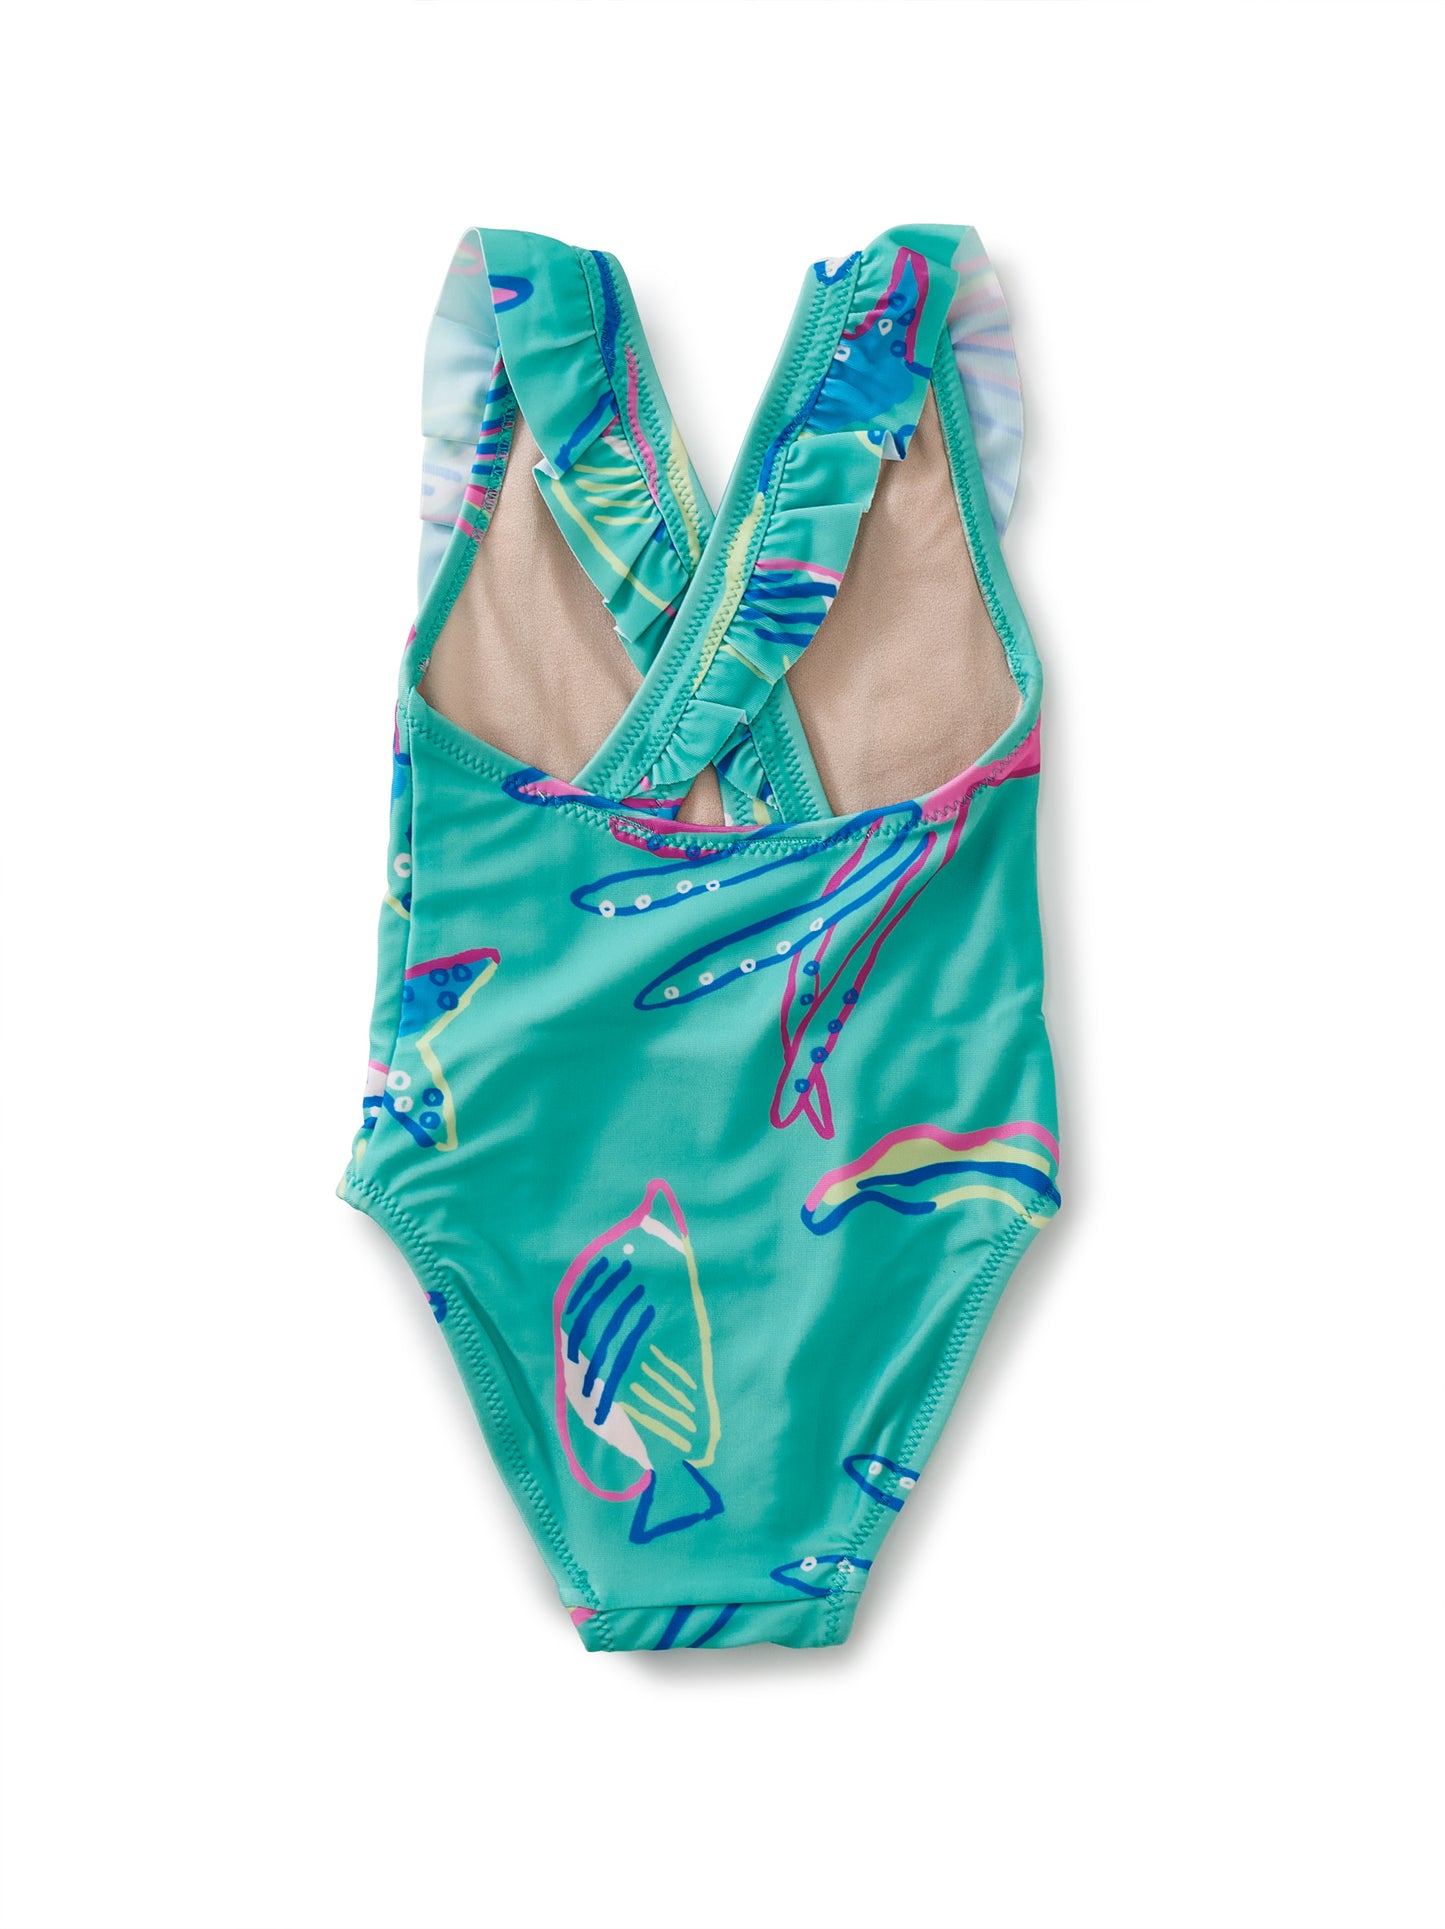 Caribbean Reef in Teal Ruffle Baby Swimsuit